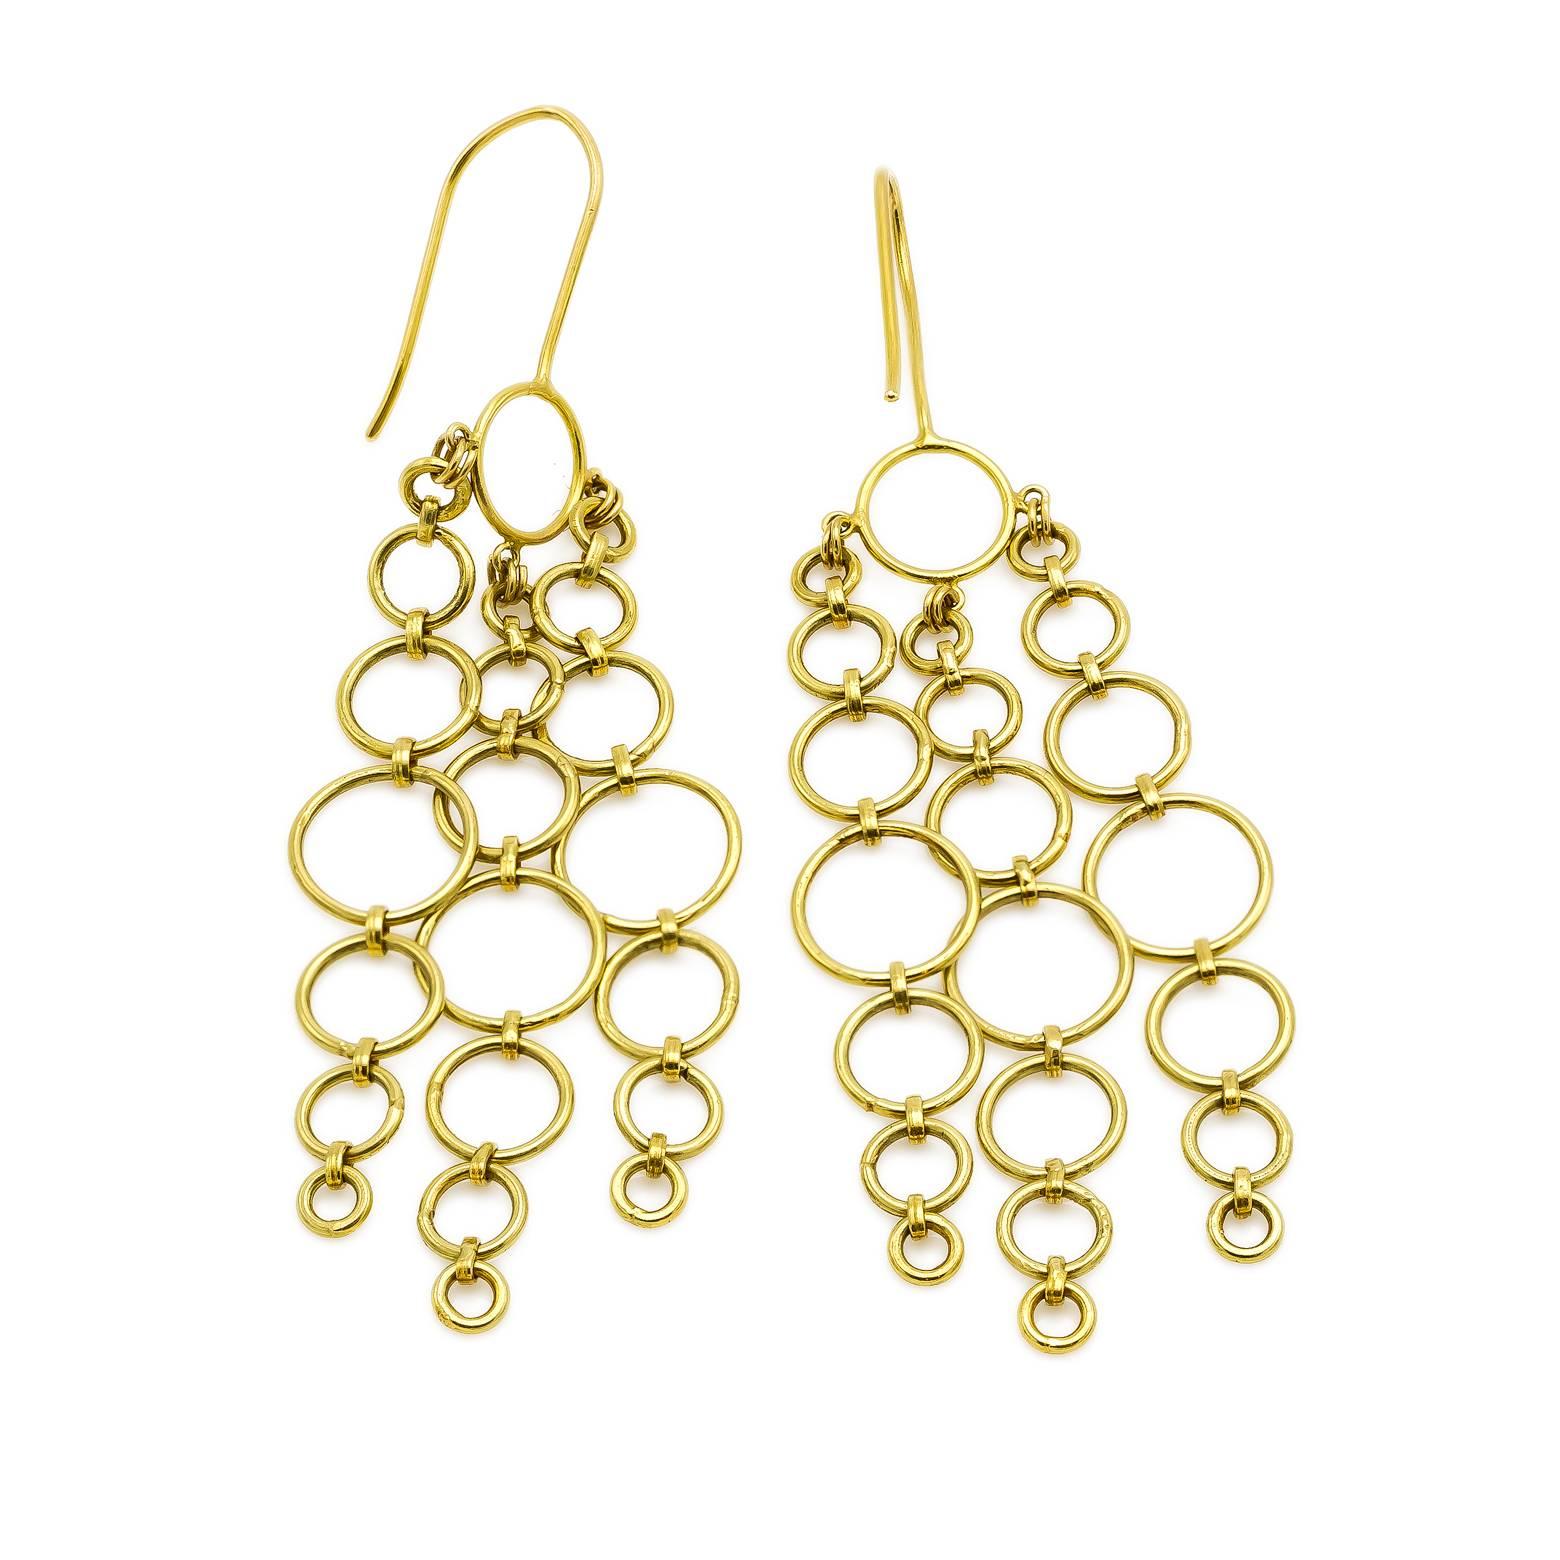 18K yellow gold chandelier circle earrings. Fun and chic and perfect for a night on the town. These beautiful chains made up of varying sizes of circles swing and sway and dance with a fun celebratory attitude. Easily dressed up while adding a touch